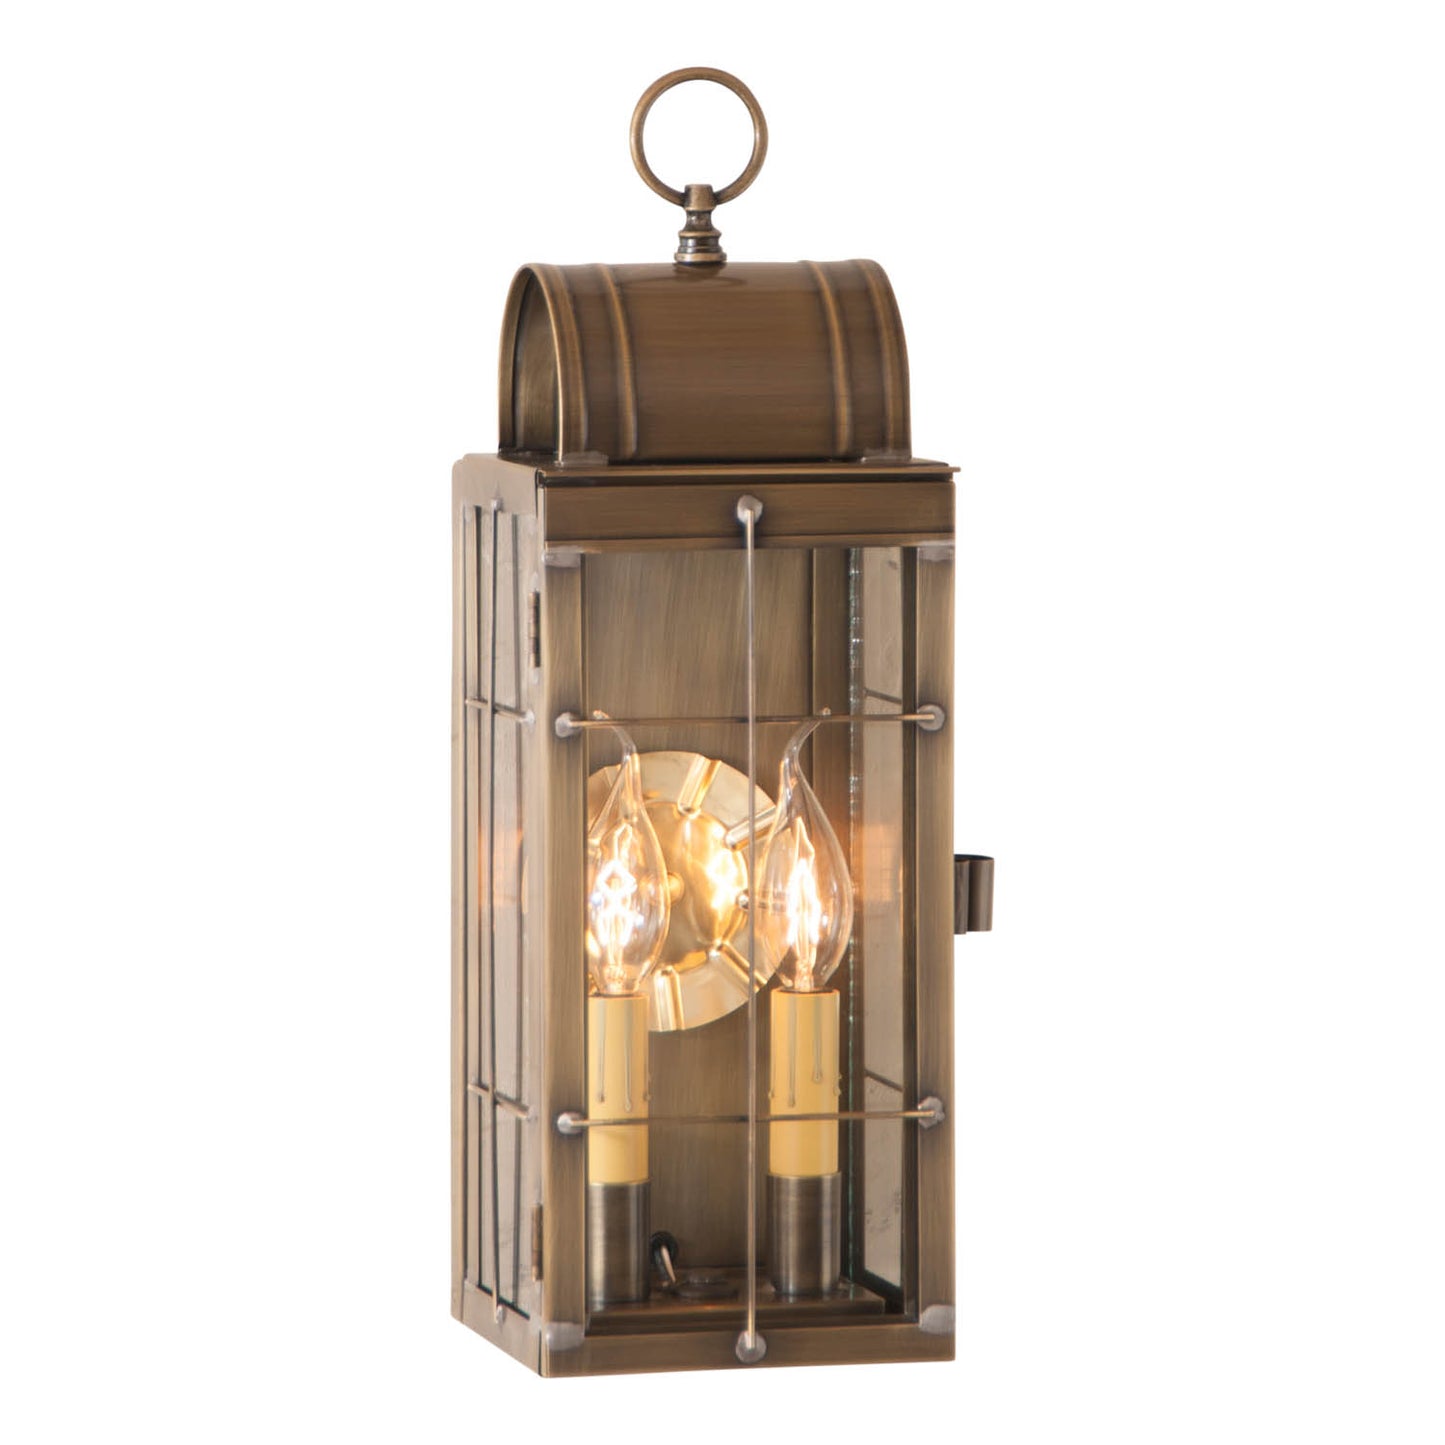 Hand-Crafted | Colonial | Arch Lantern